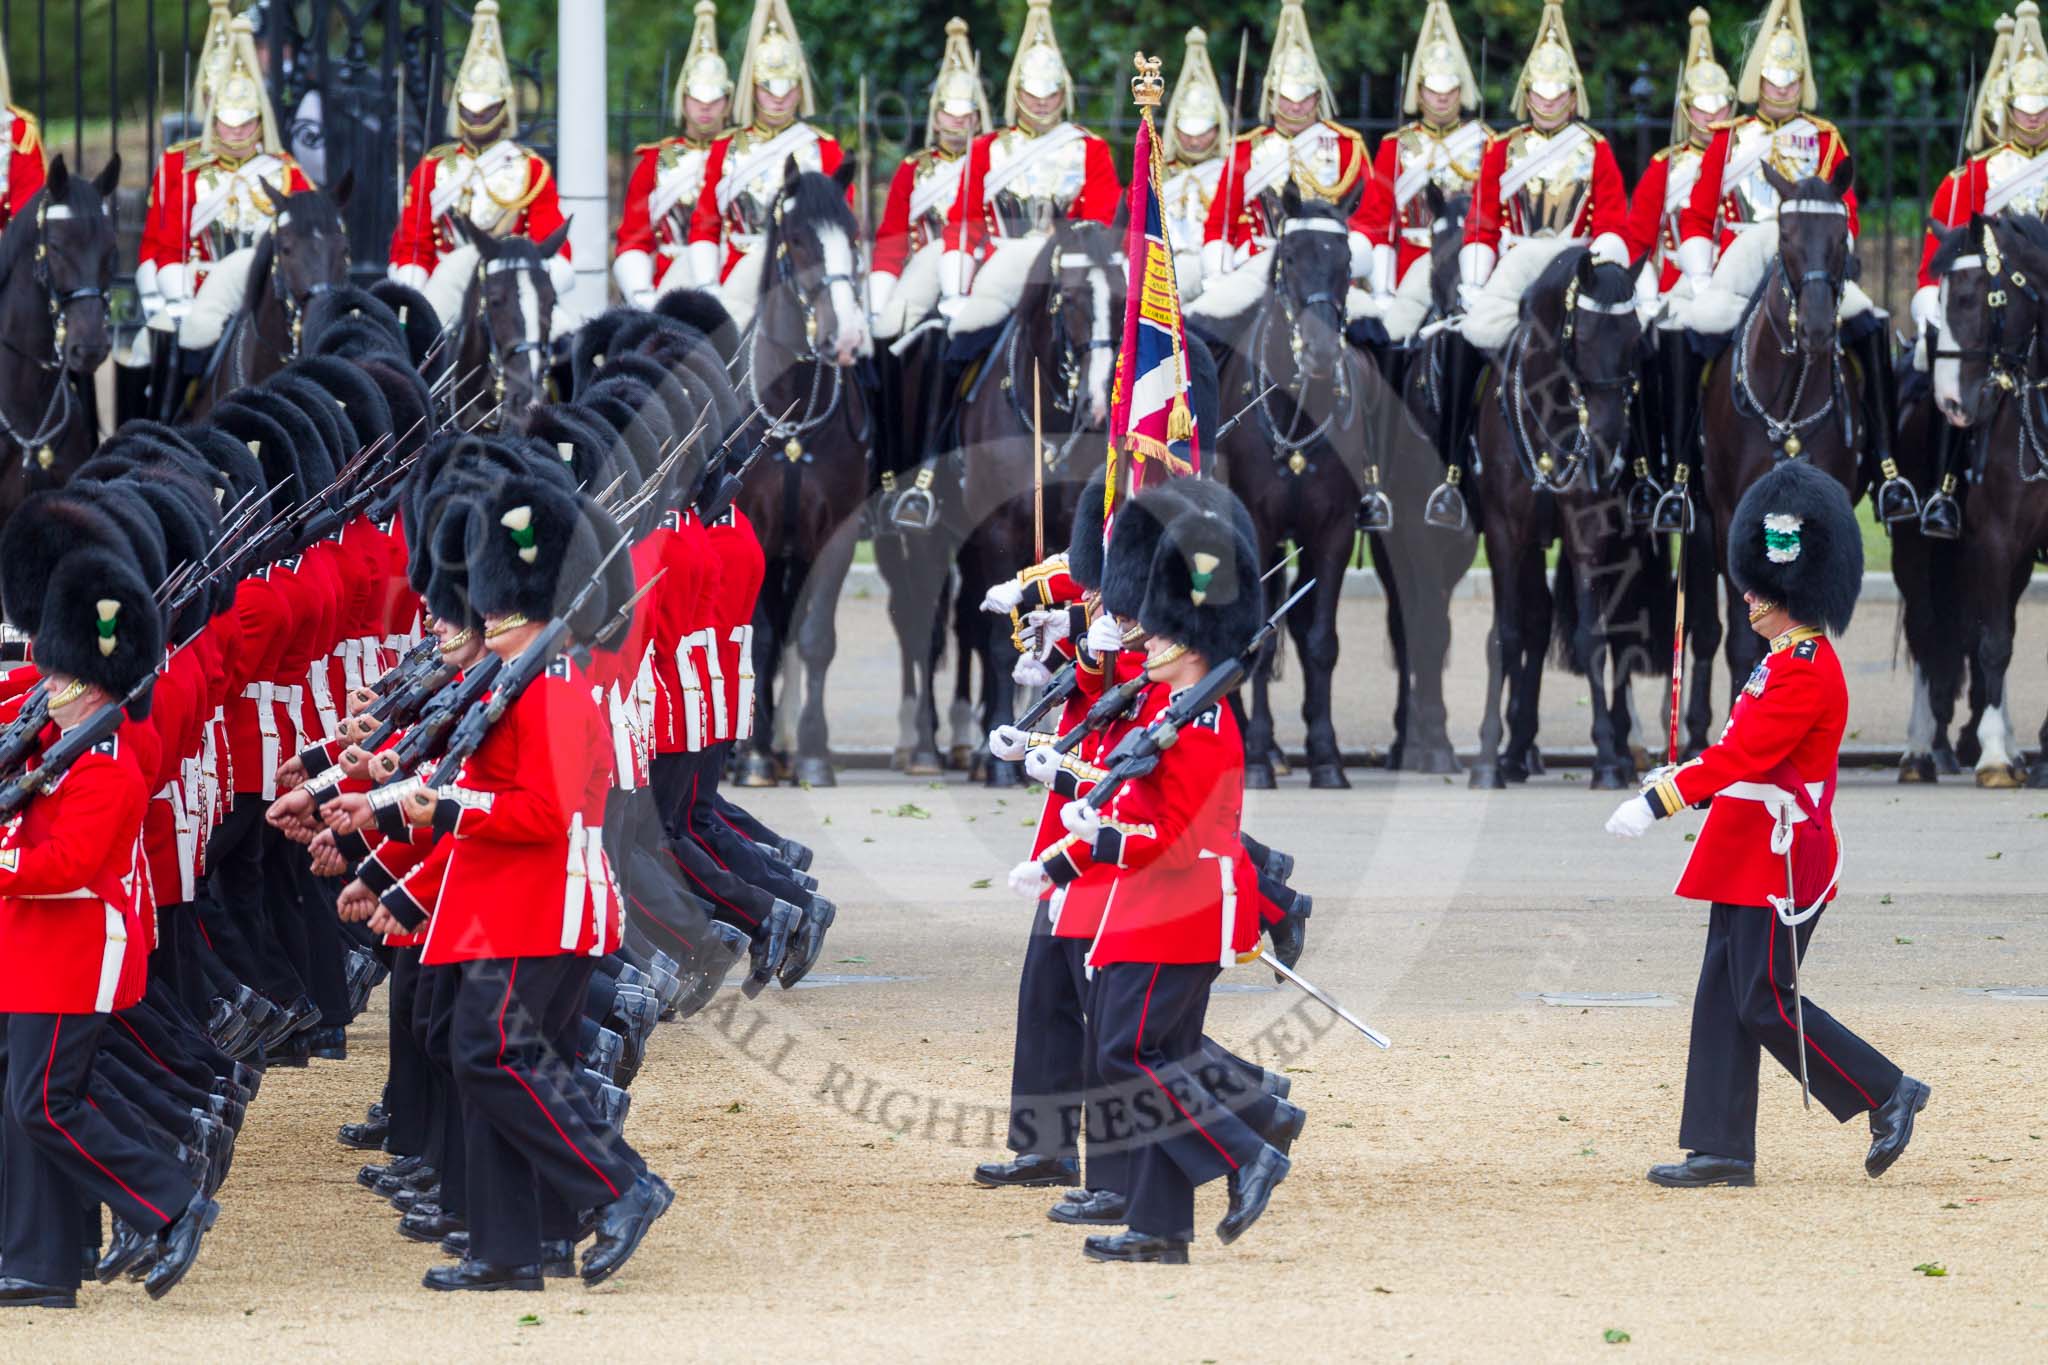 The Colonel's Review 2015.
Horse Guards Parade, Westminster,
London,

United Kingdom,
on 06 June 2015 at 11:47, image #443